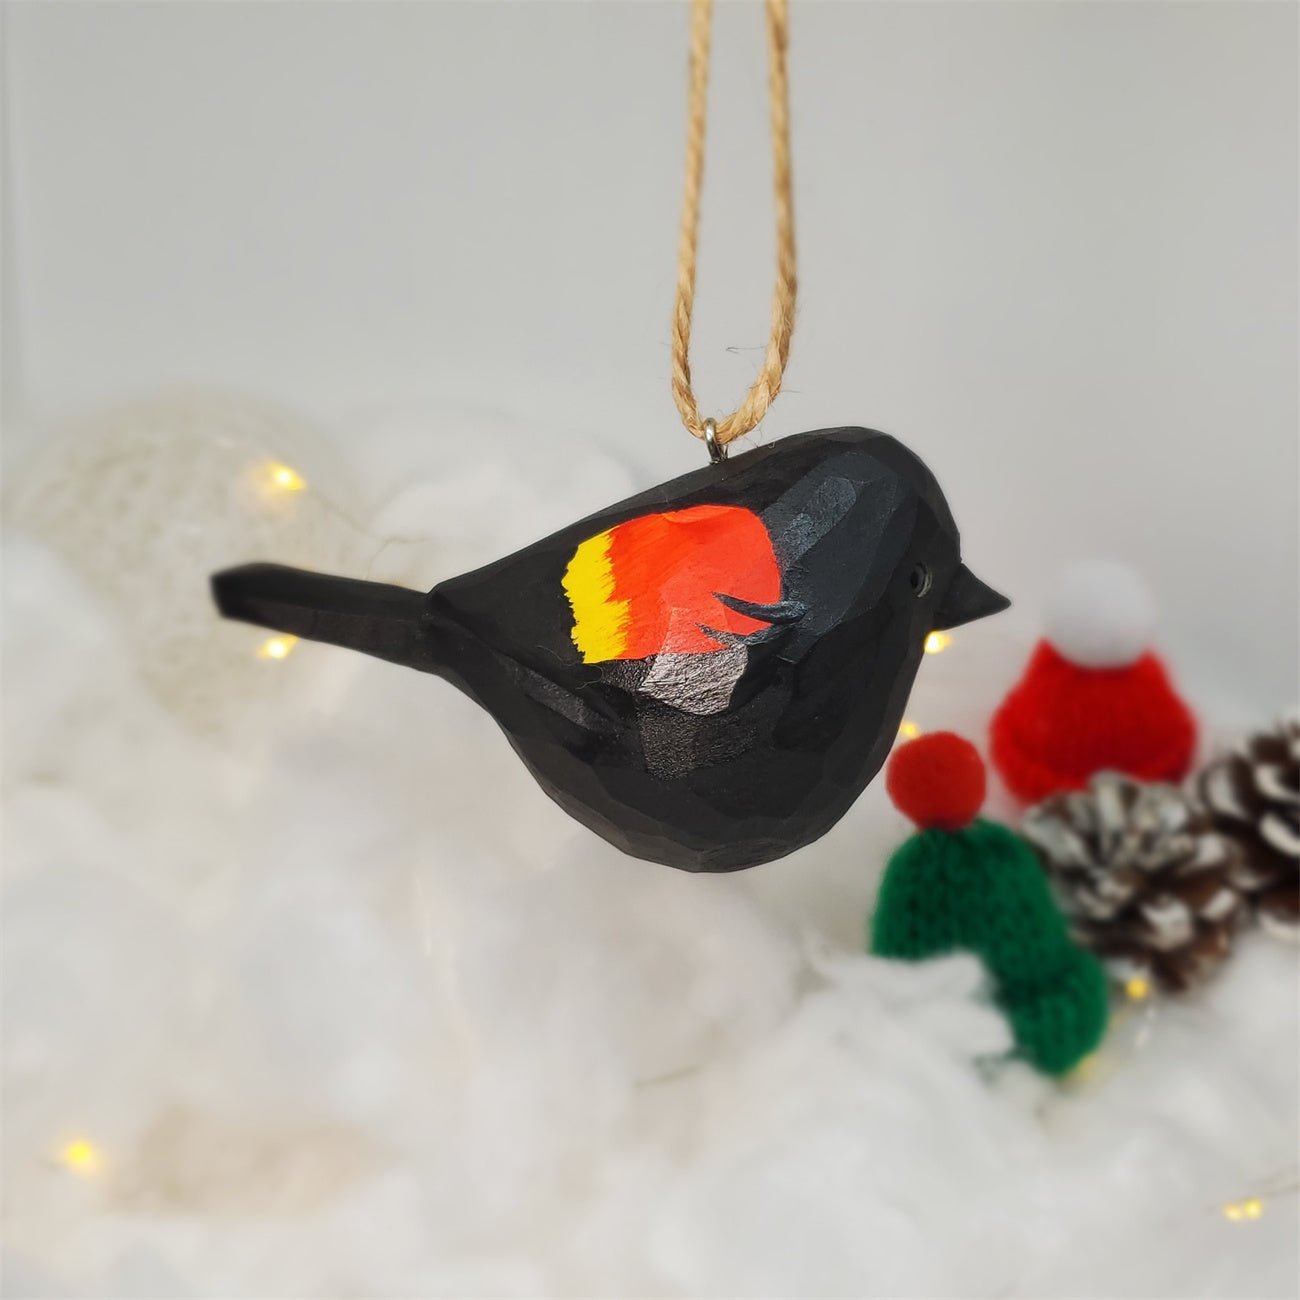 Blackbird Carved and Painted Wooden Bird Ornaments - PAINTED BIRD SHOP